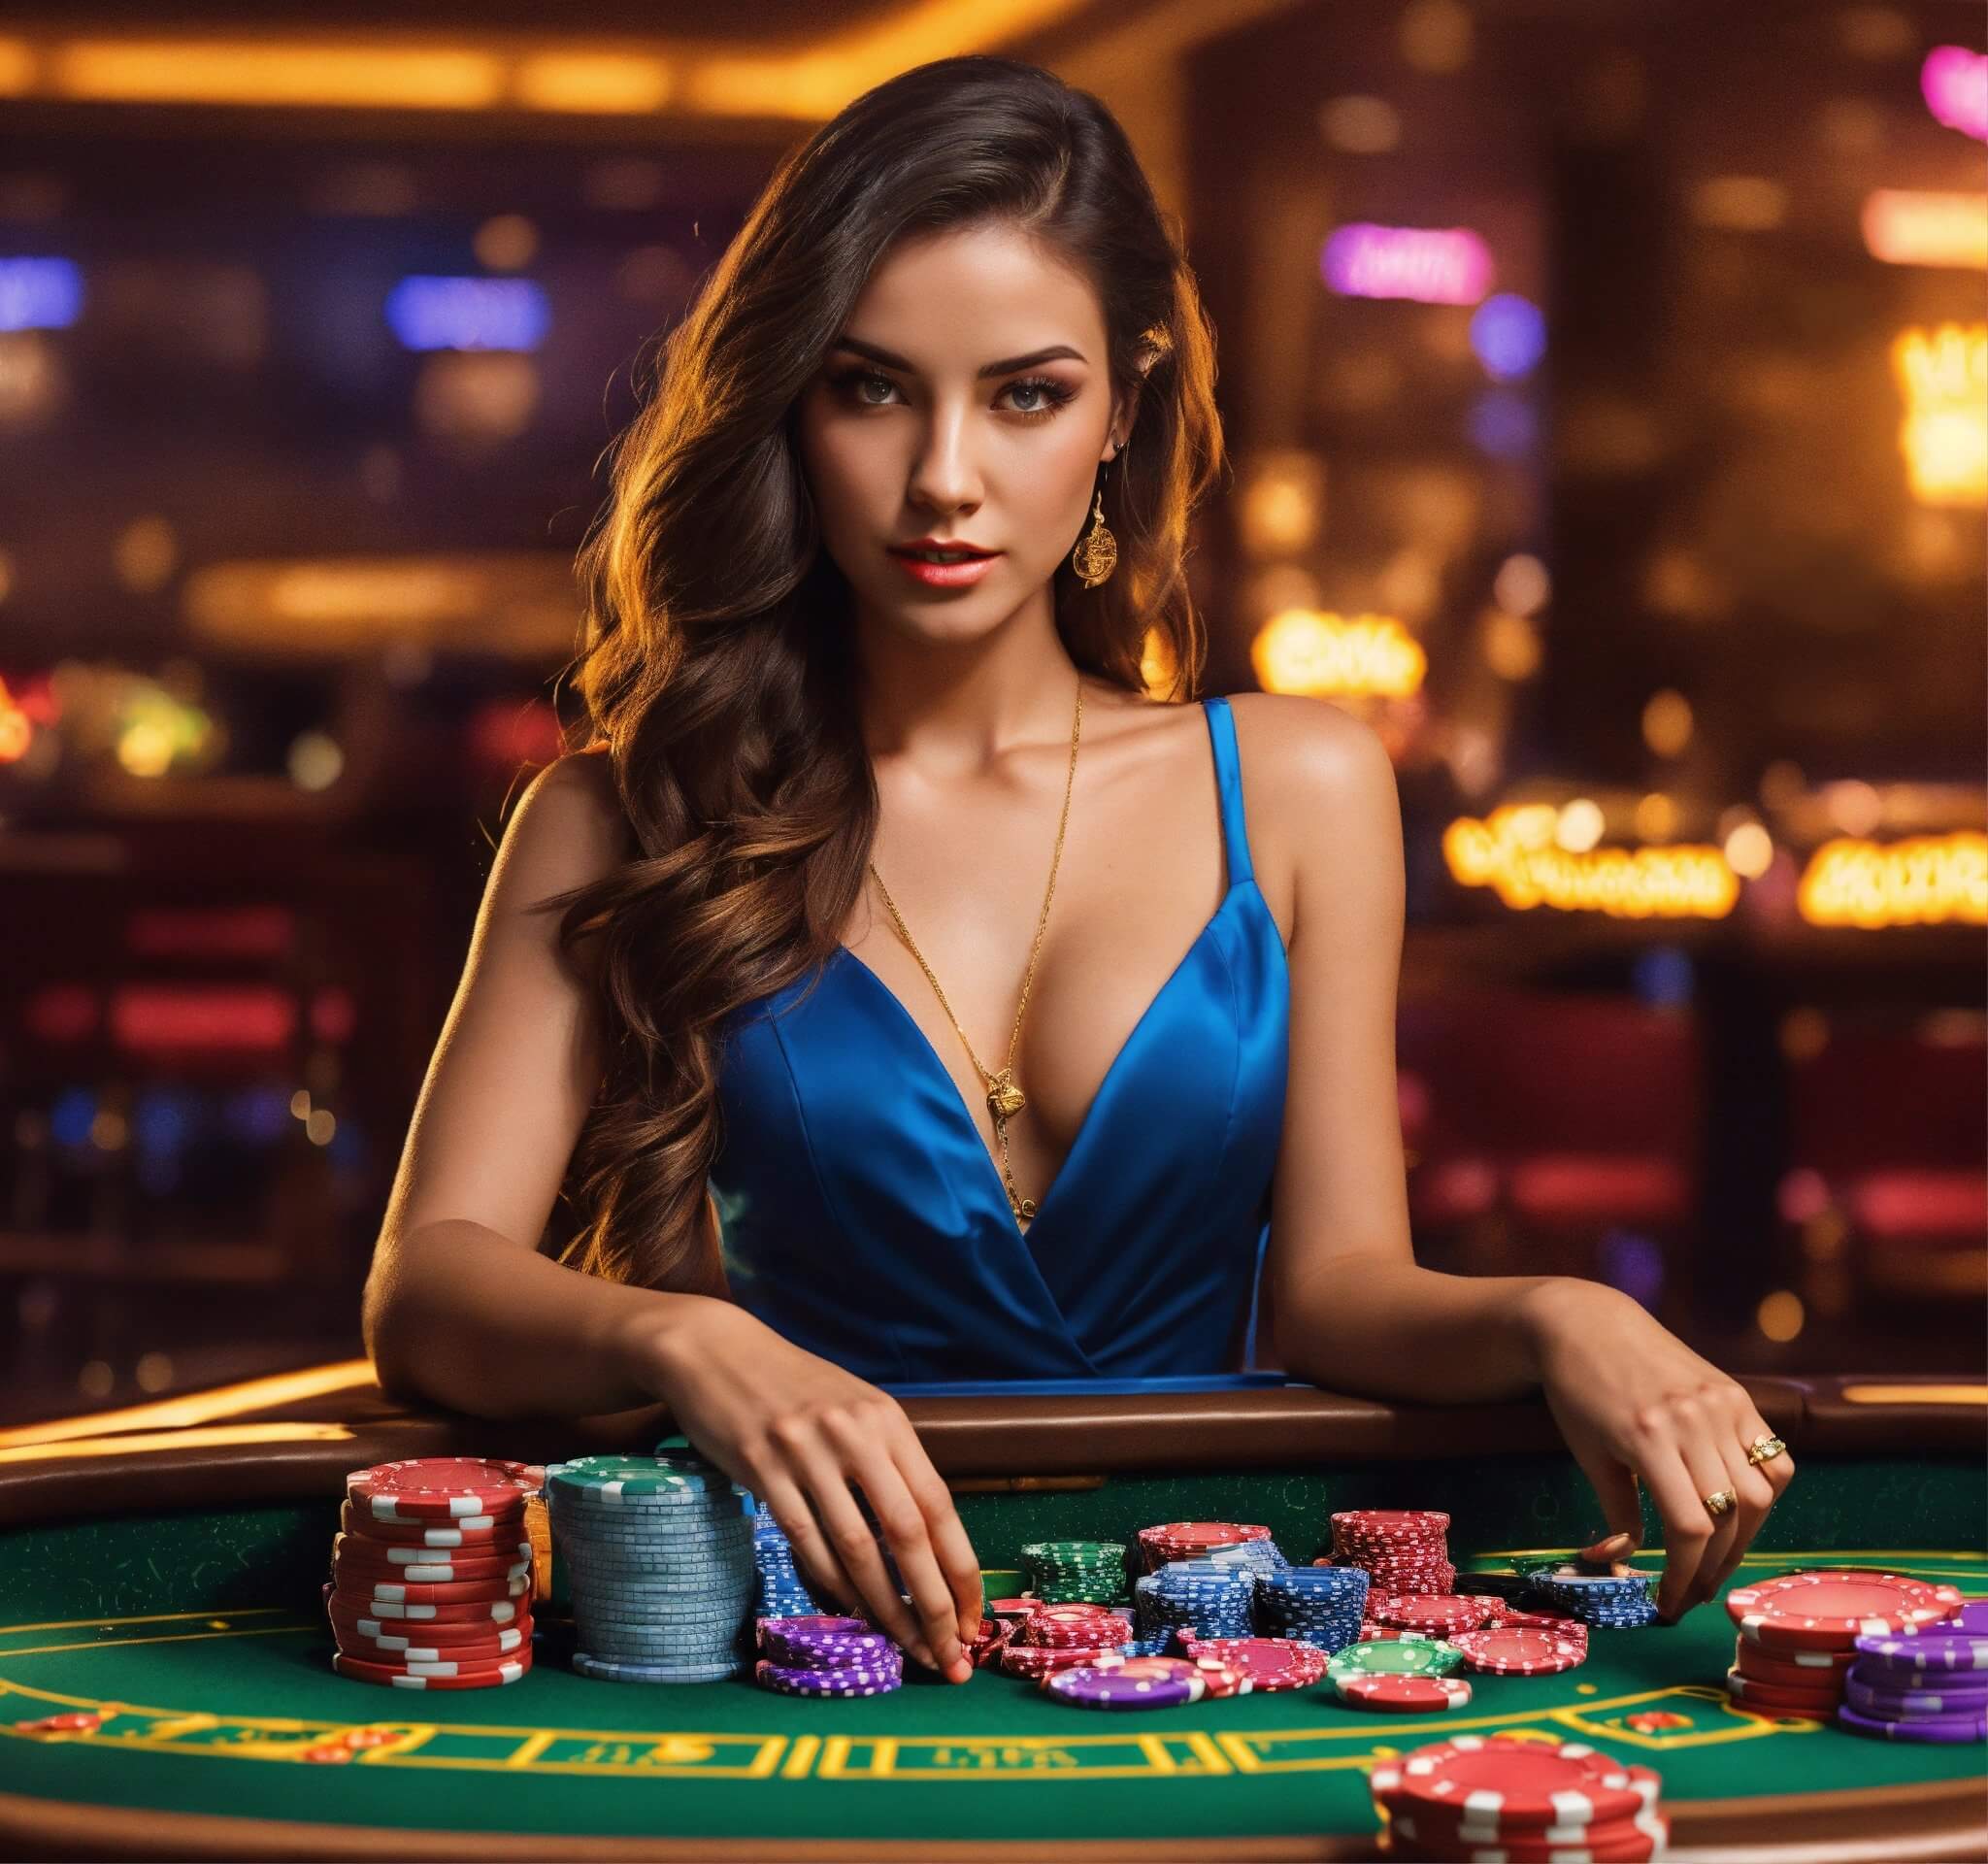 Top 5 Best Casino Games to Win Money 🎰 Which Casino Games Have Low House Edge and Best Chance to Build Your Bankroll? 💵